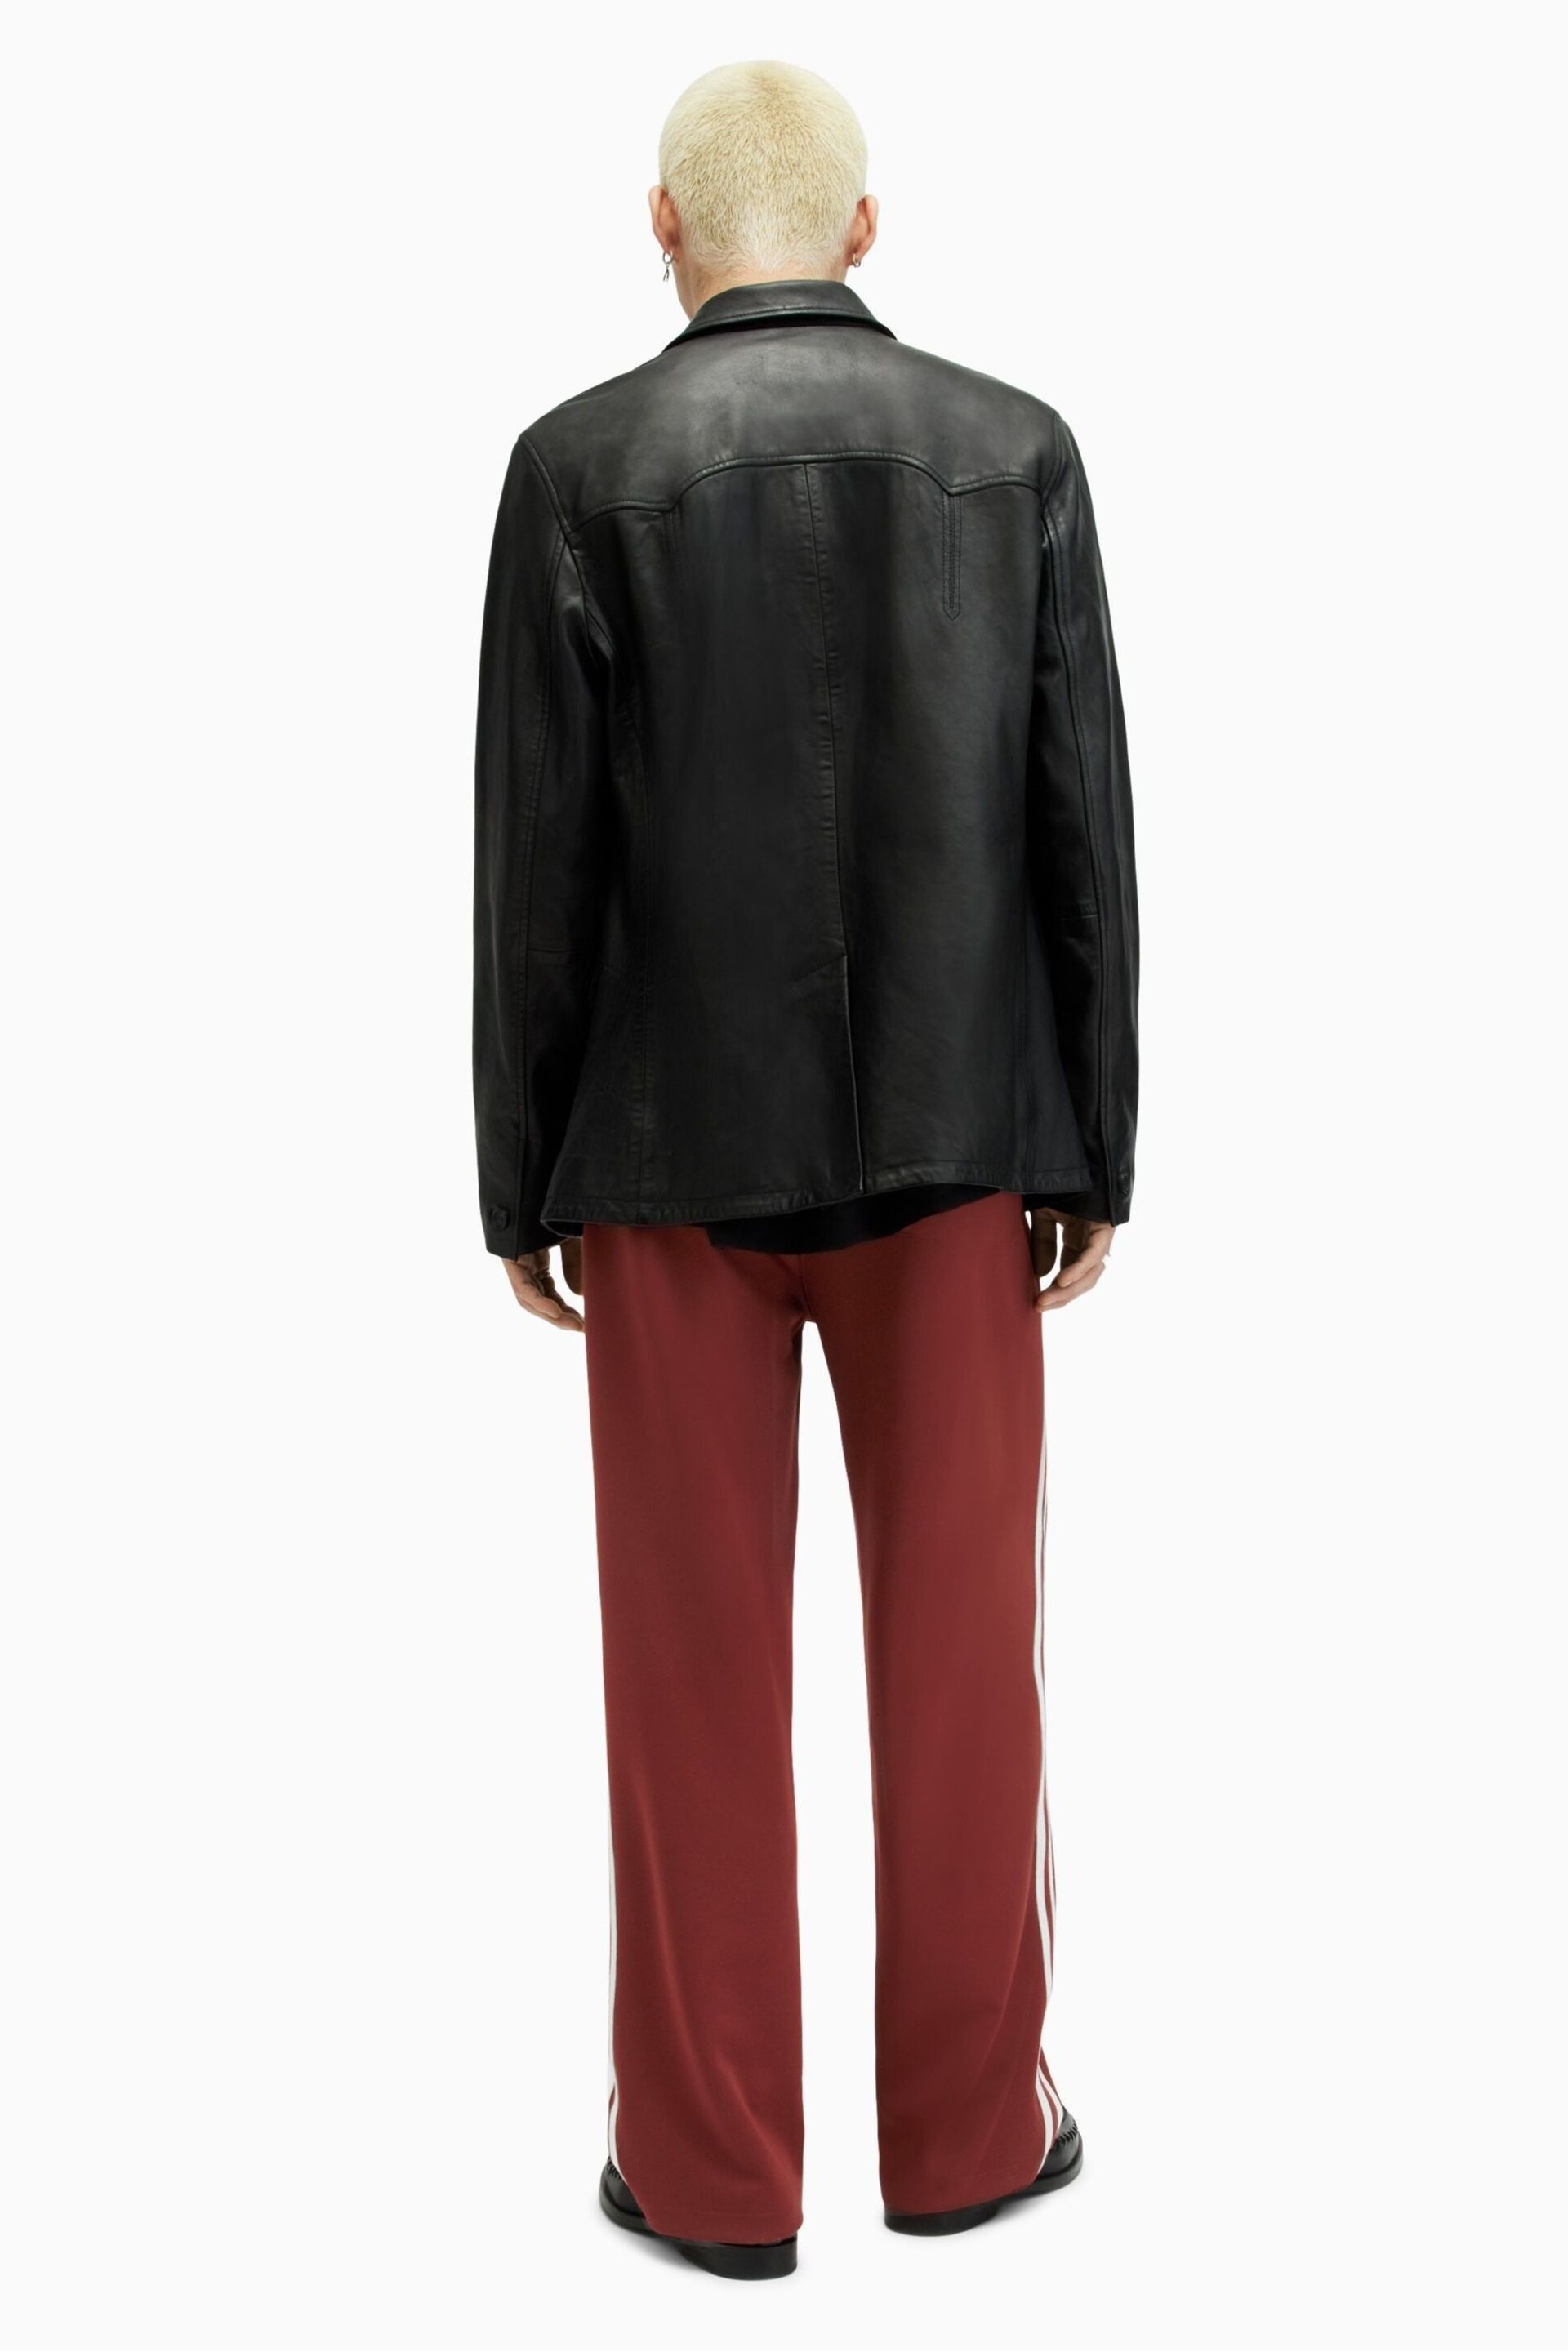 AllSaints Red Oren Joggers - Image 2 of 7